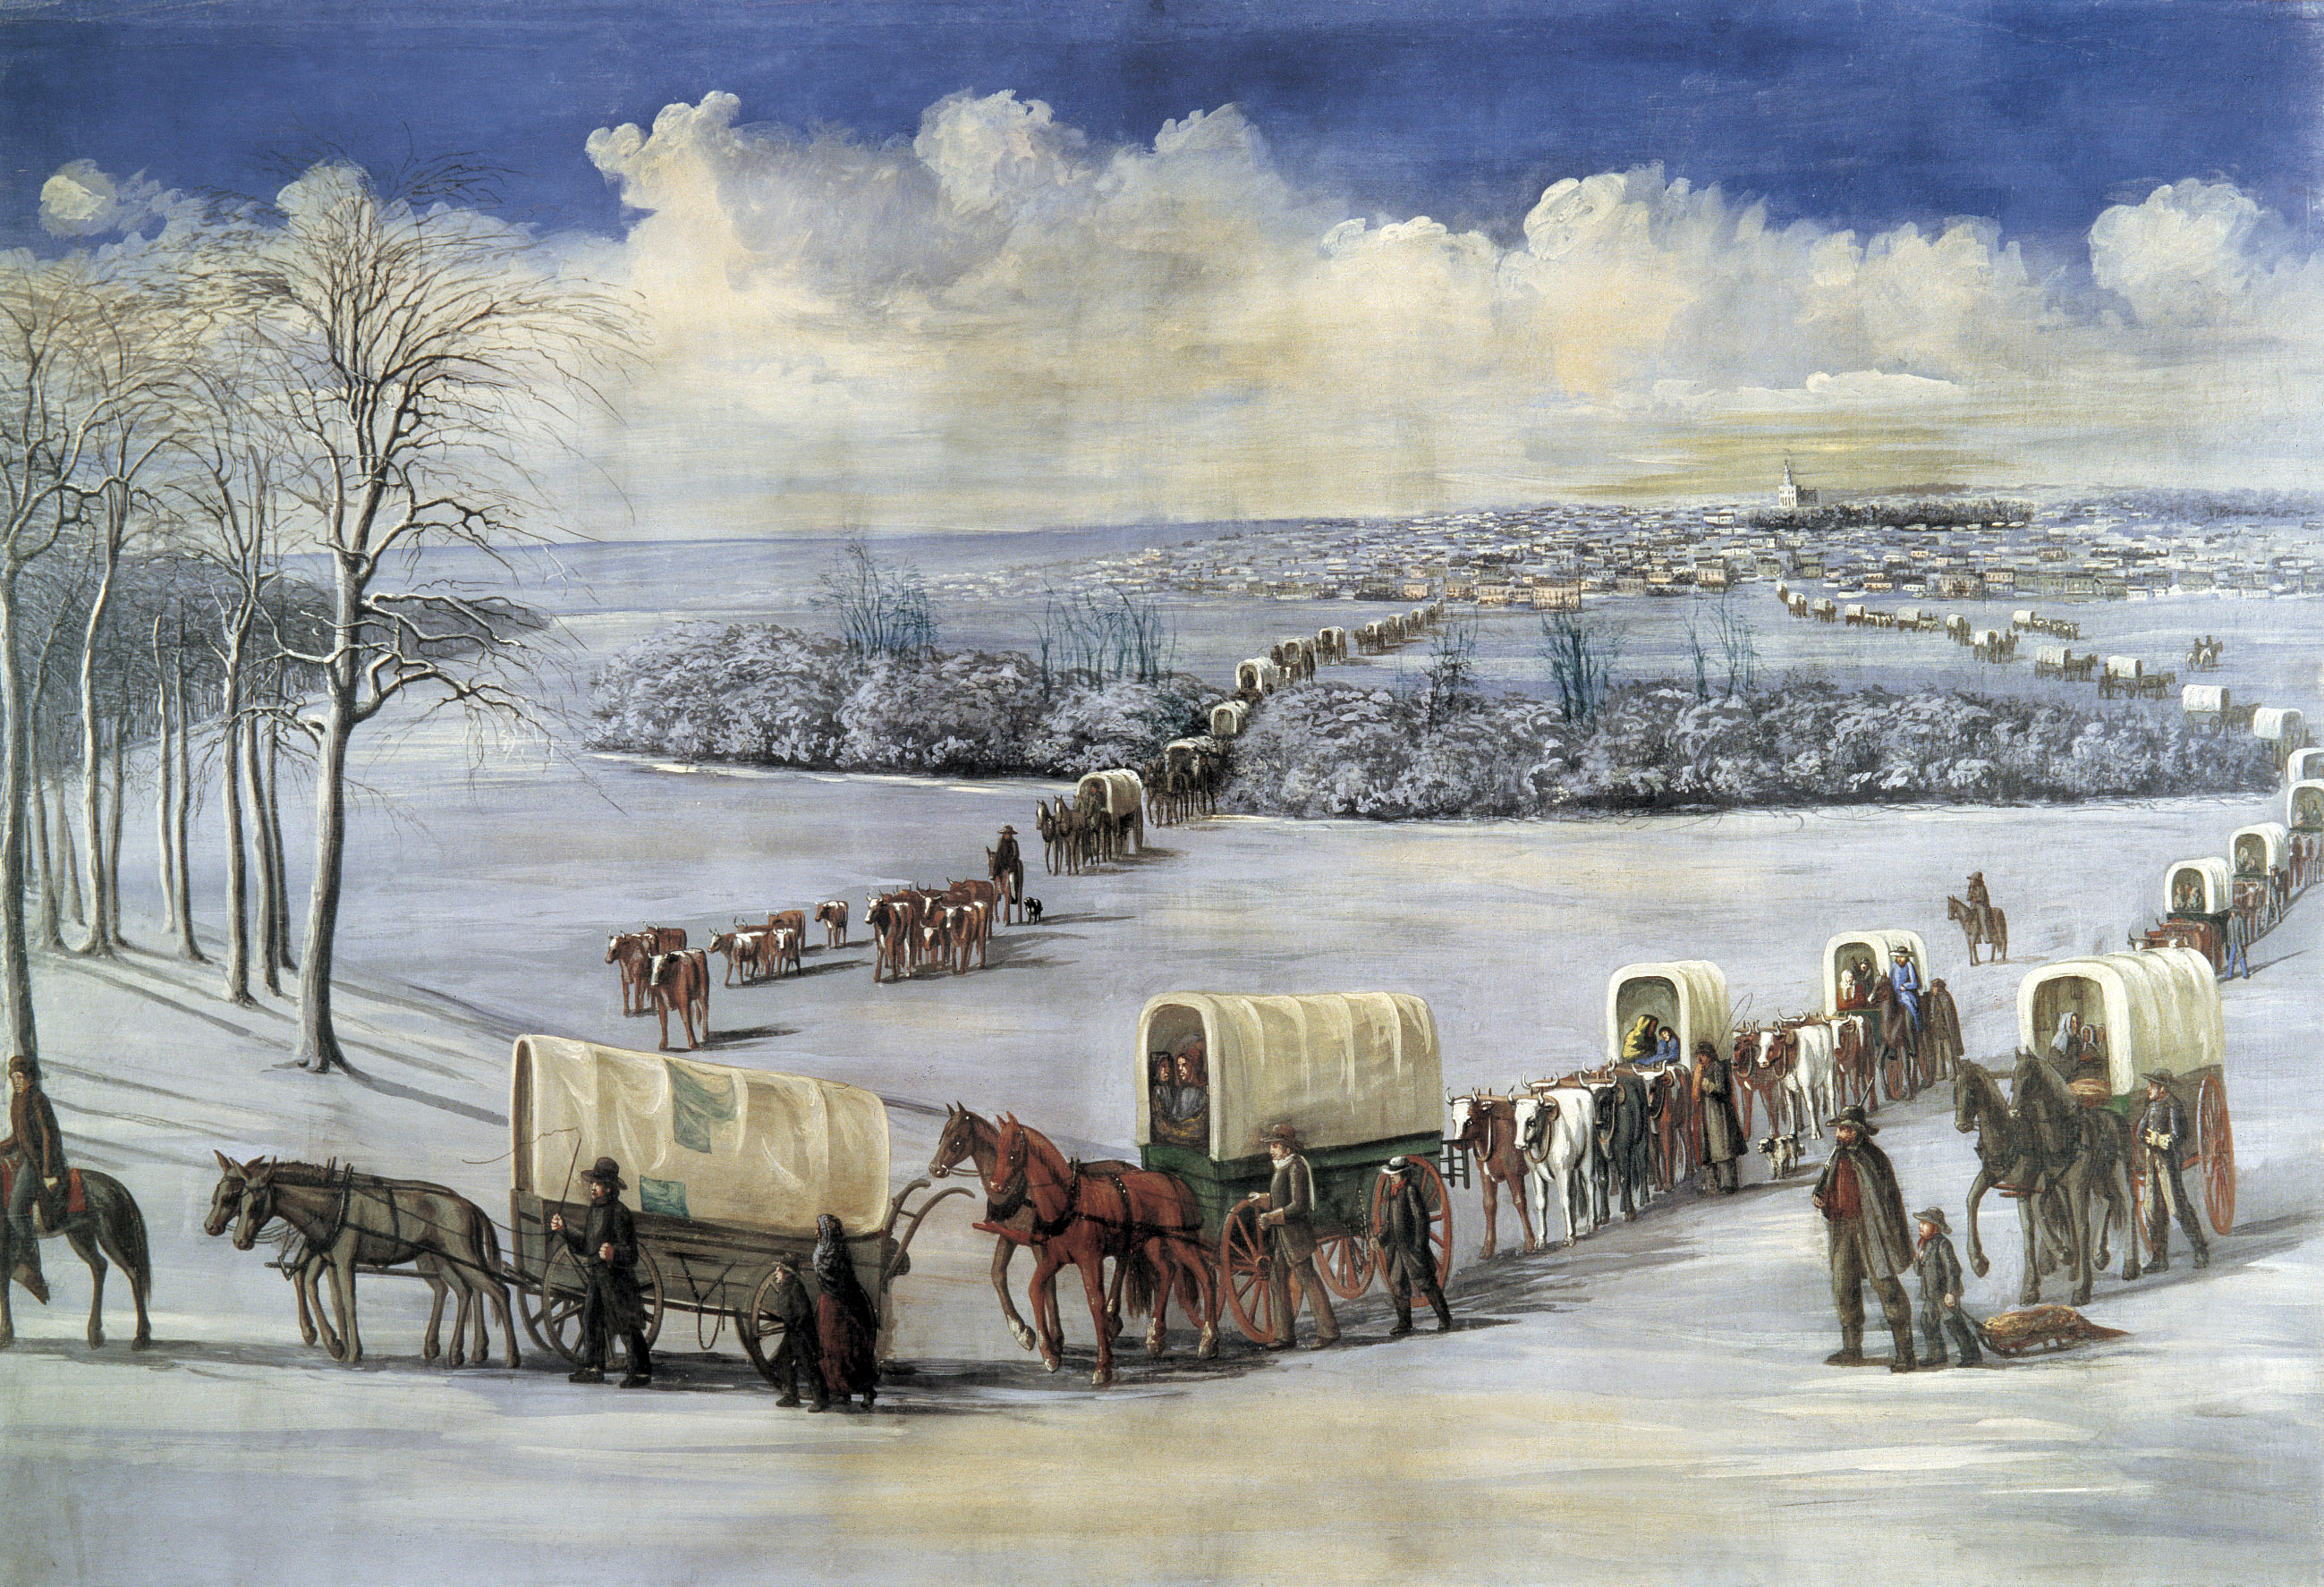 File:Crossing the Mississippi on the Ice by C.C.A. Christensen.png